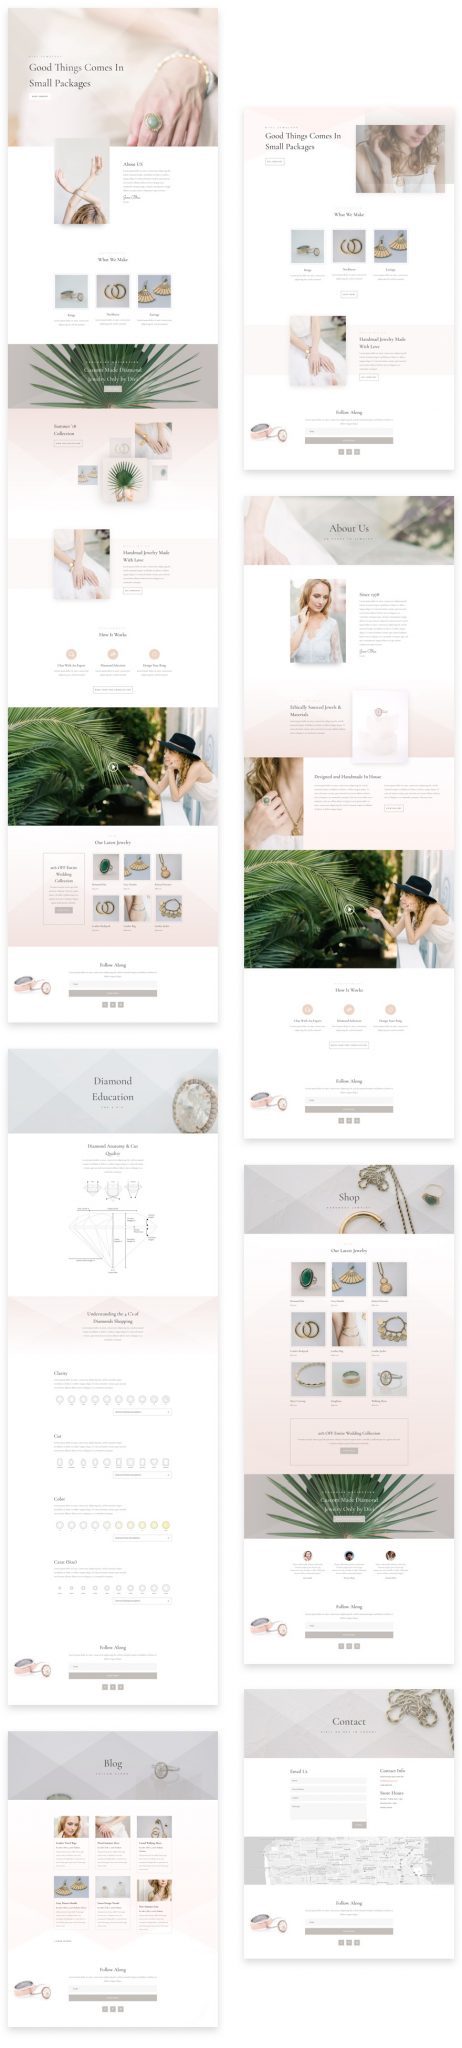 Jeweler Layout Pack